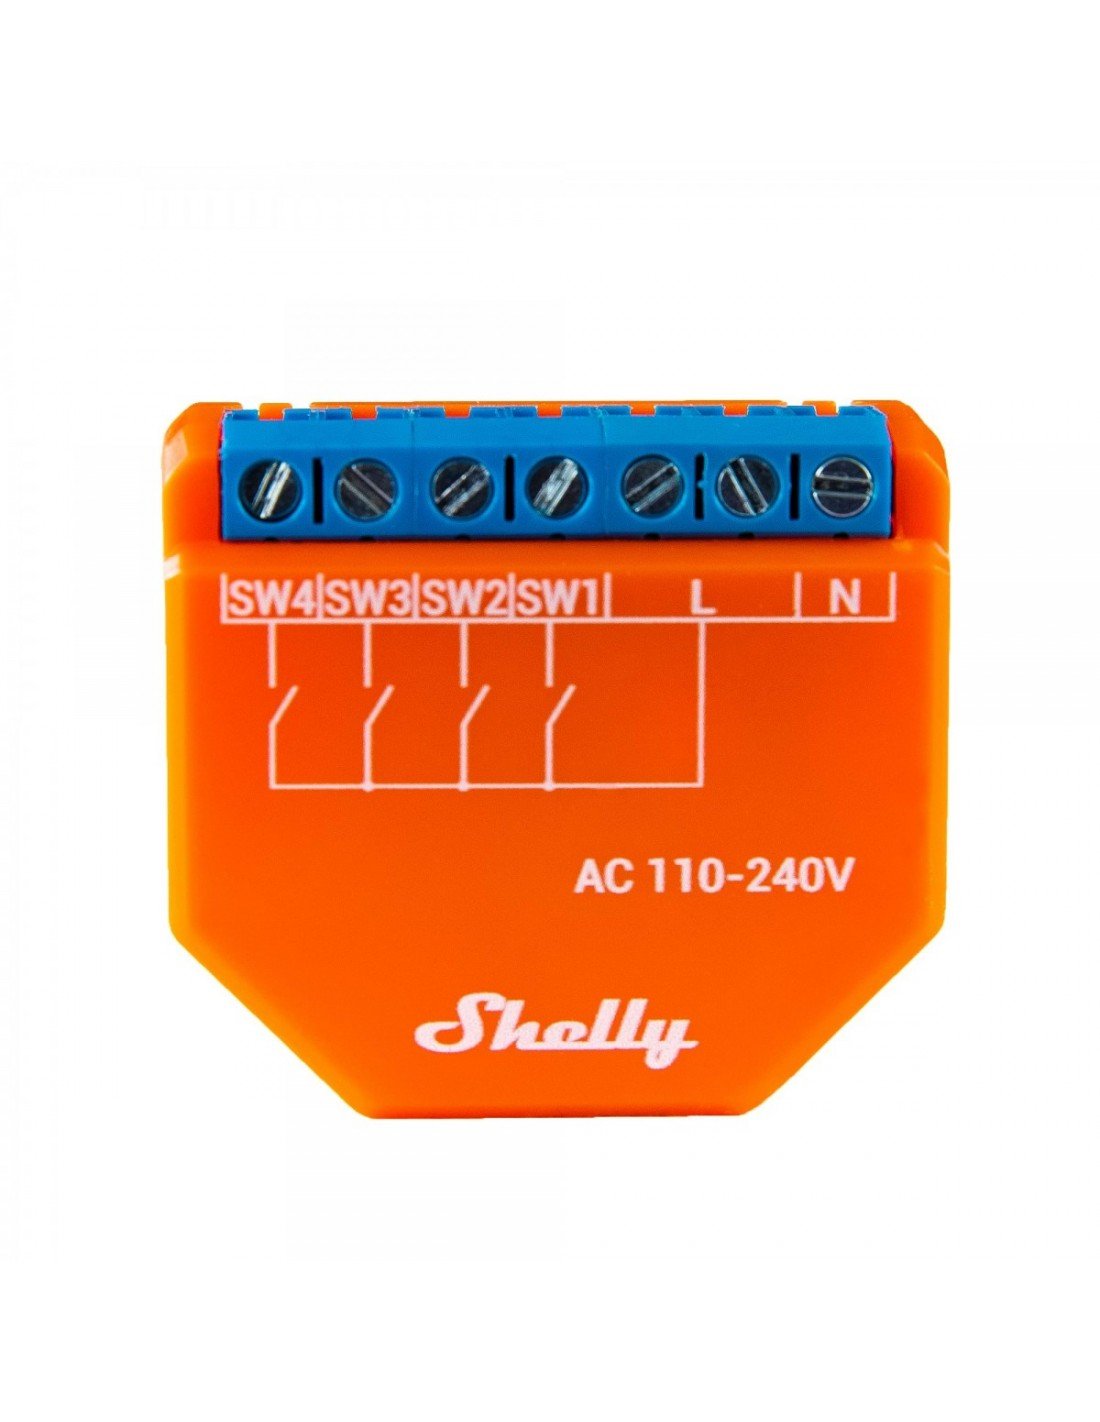 Shelly - Plus I4 WiFi-control for scenes and activation - Elektronikk